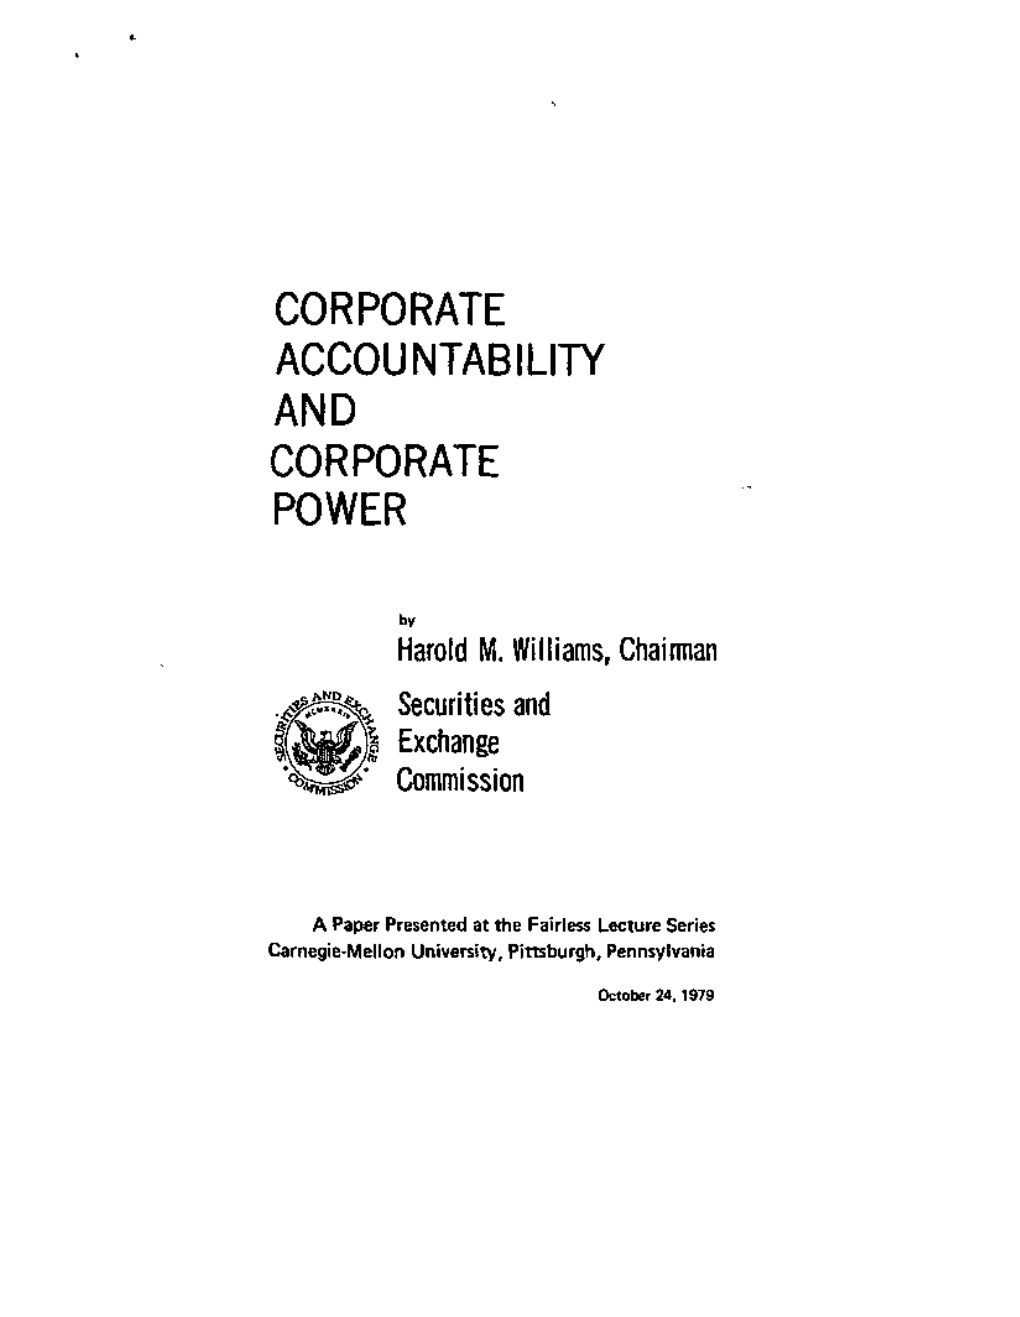 Corporate Accountability and Corporate Power